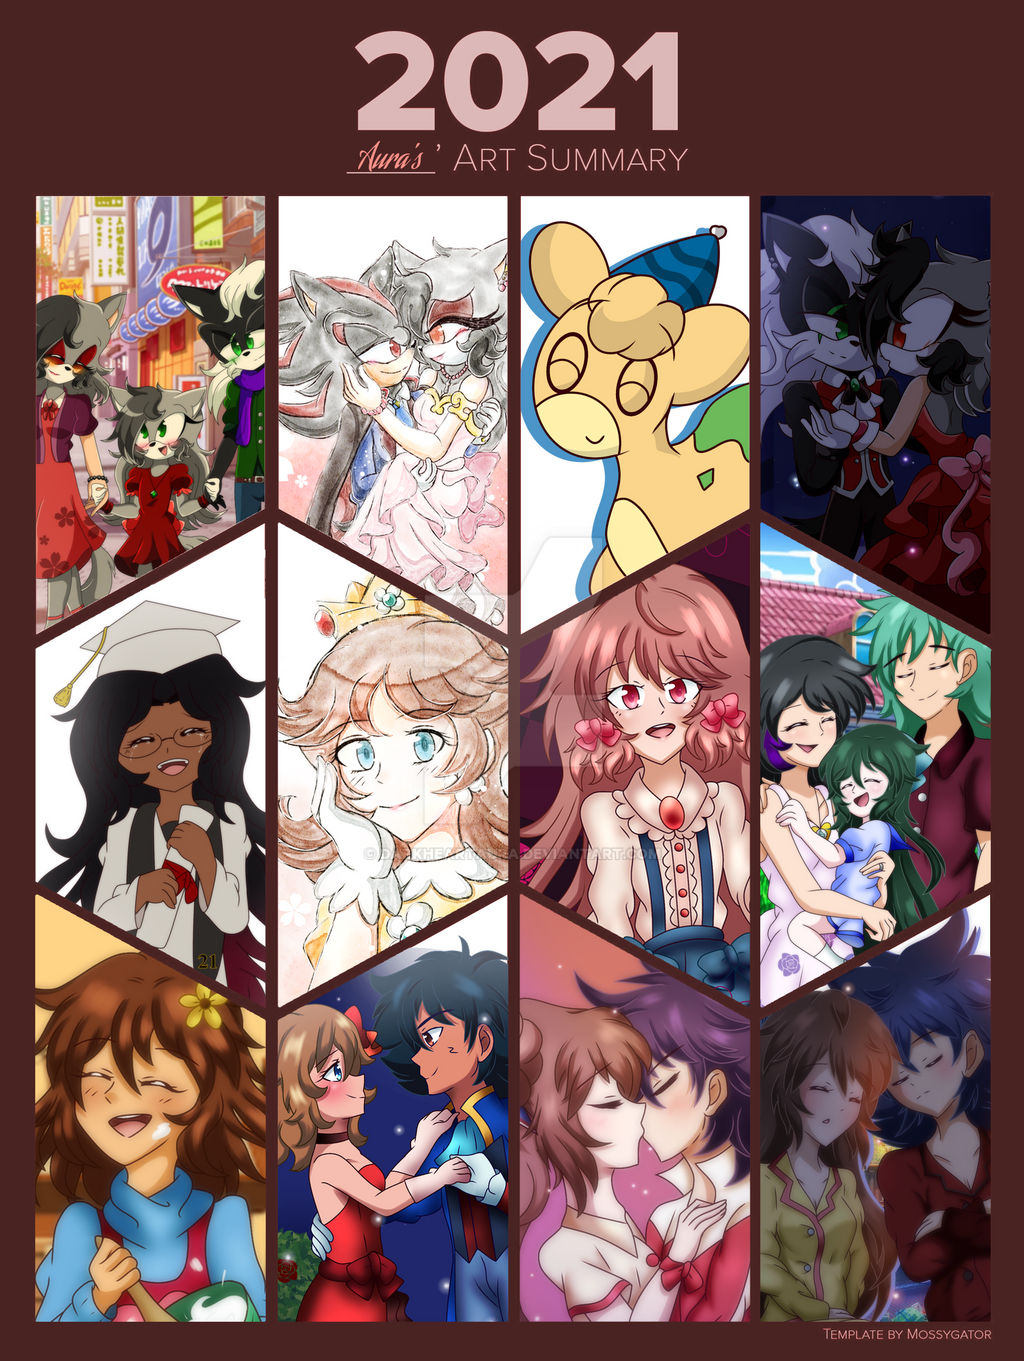 The Journal with all the Anime (not finished) by Shipping-Gentleman on  DeviantArt